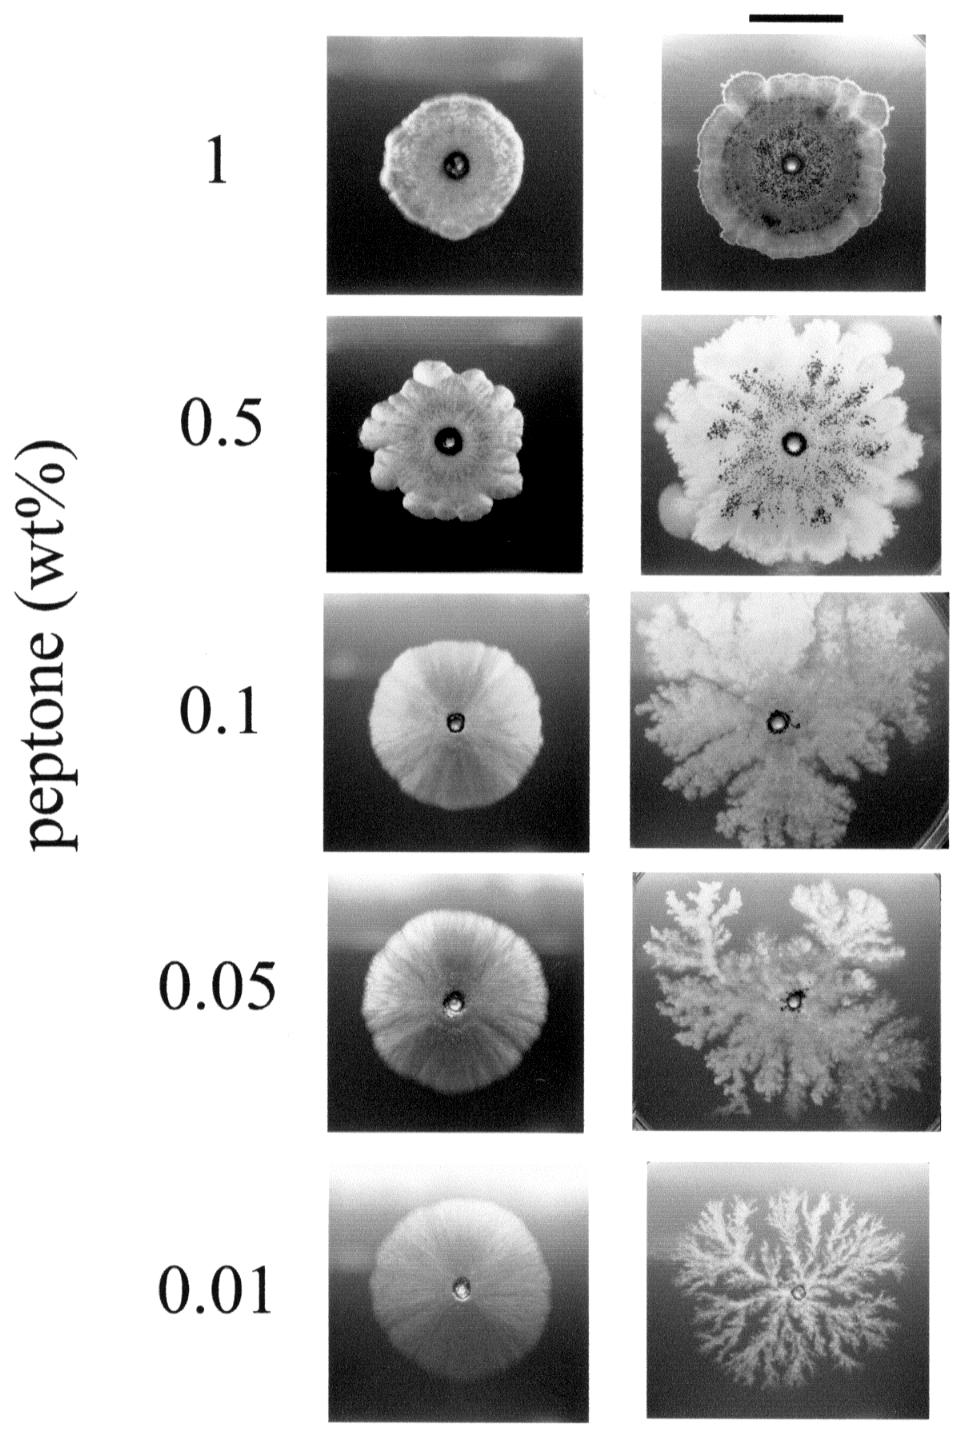 318 S. MATSUURA Figure 2 shows the photographs of A. nidulans wild type strain colonies cultivated for 10 days and the mutant strain colonies cultivated for 40 days.